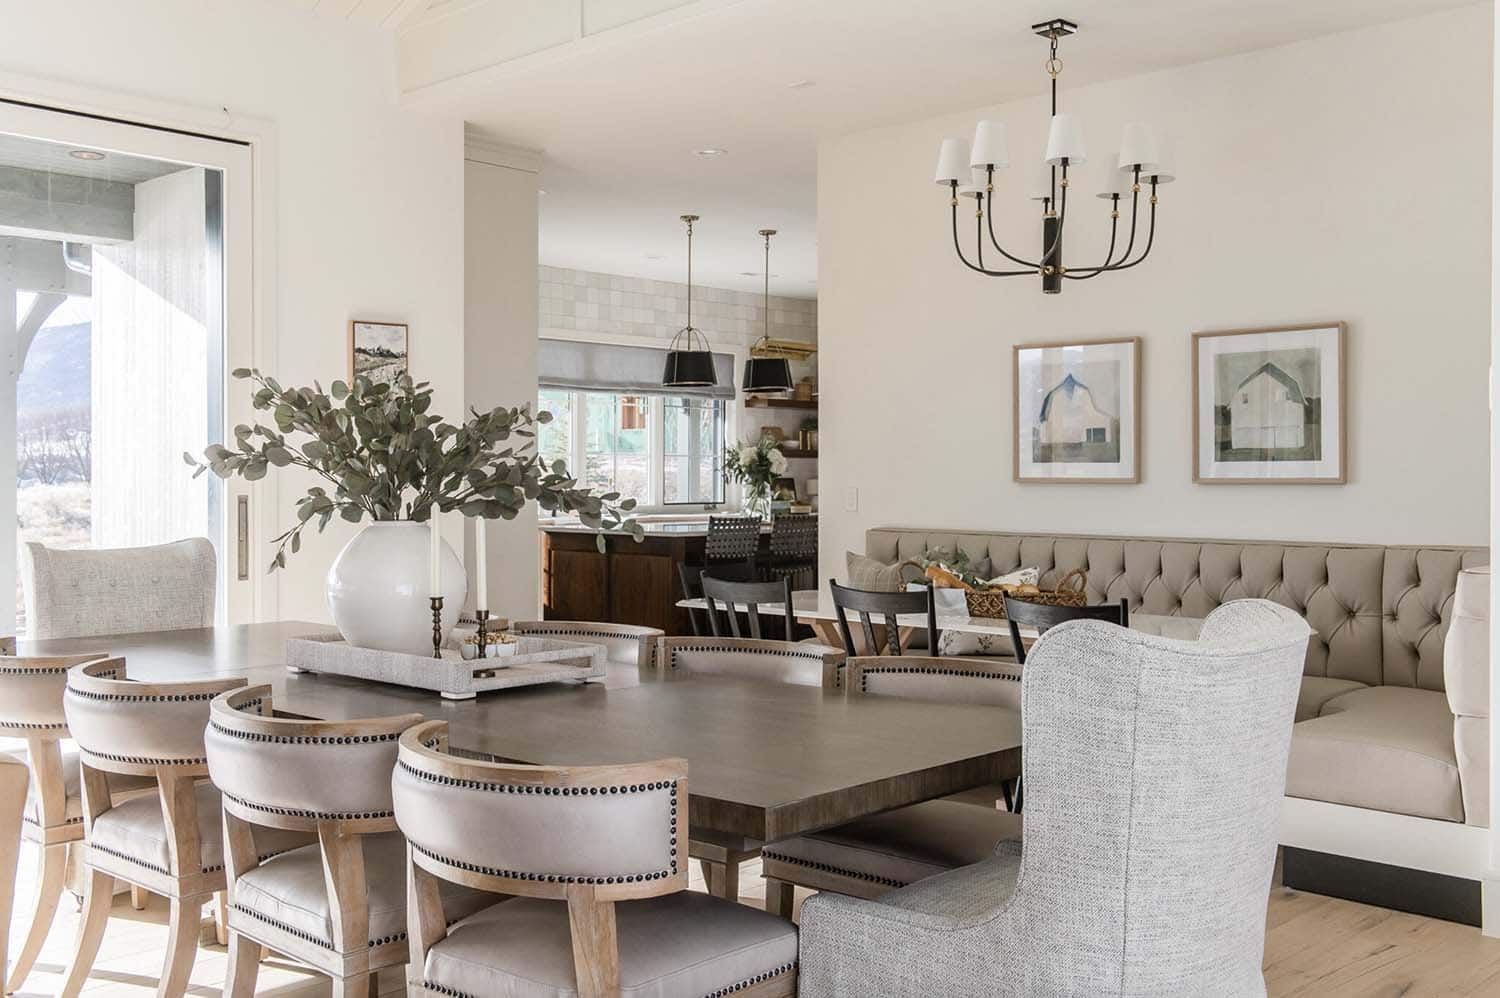 traditional farmhouse style dining banquette